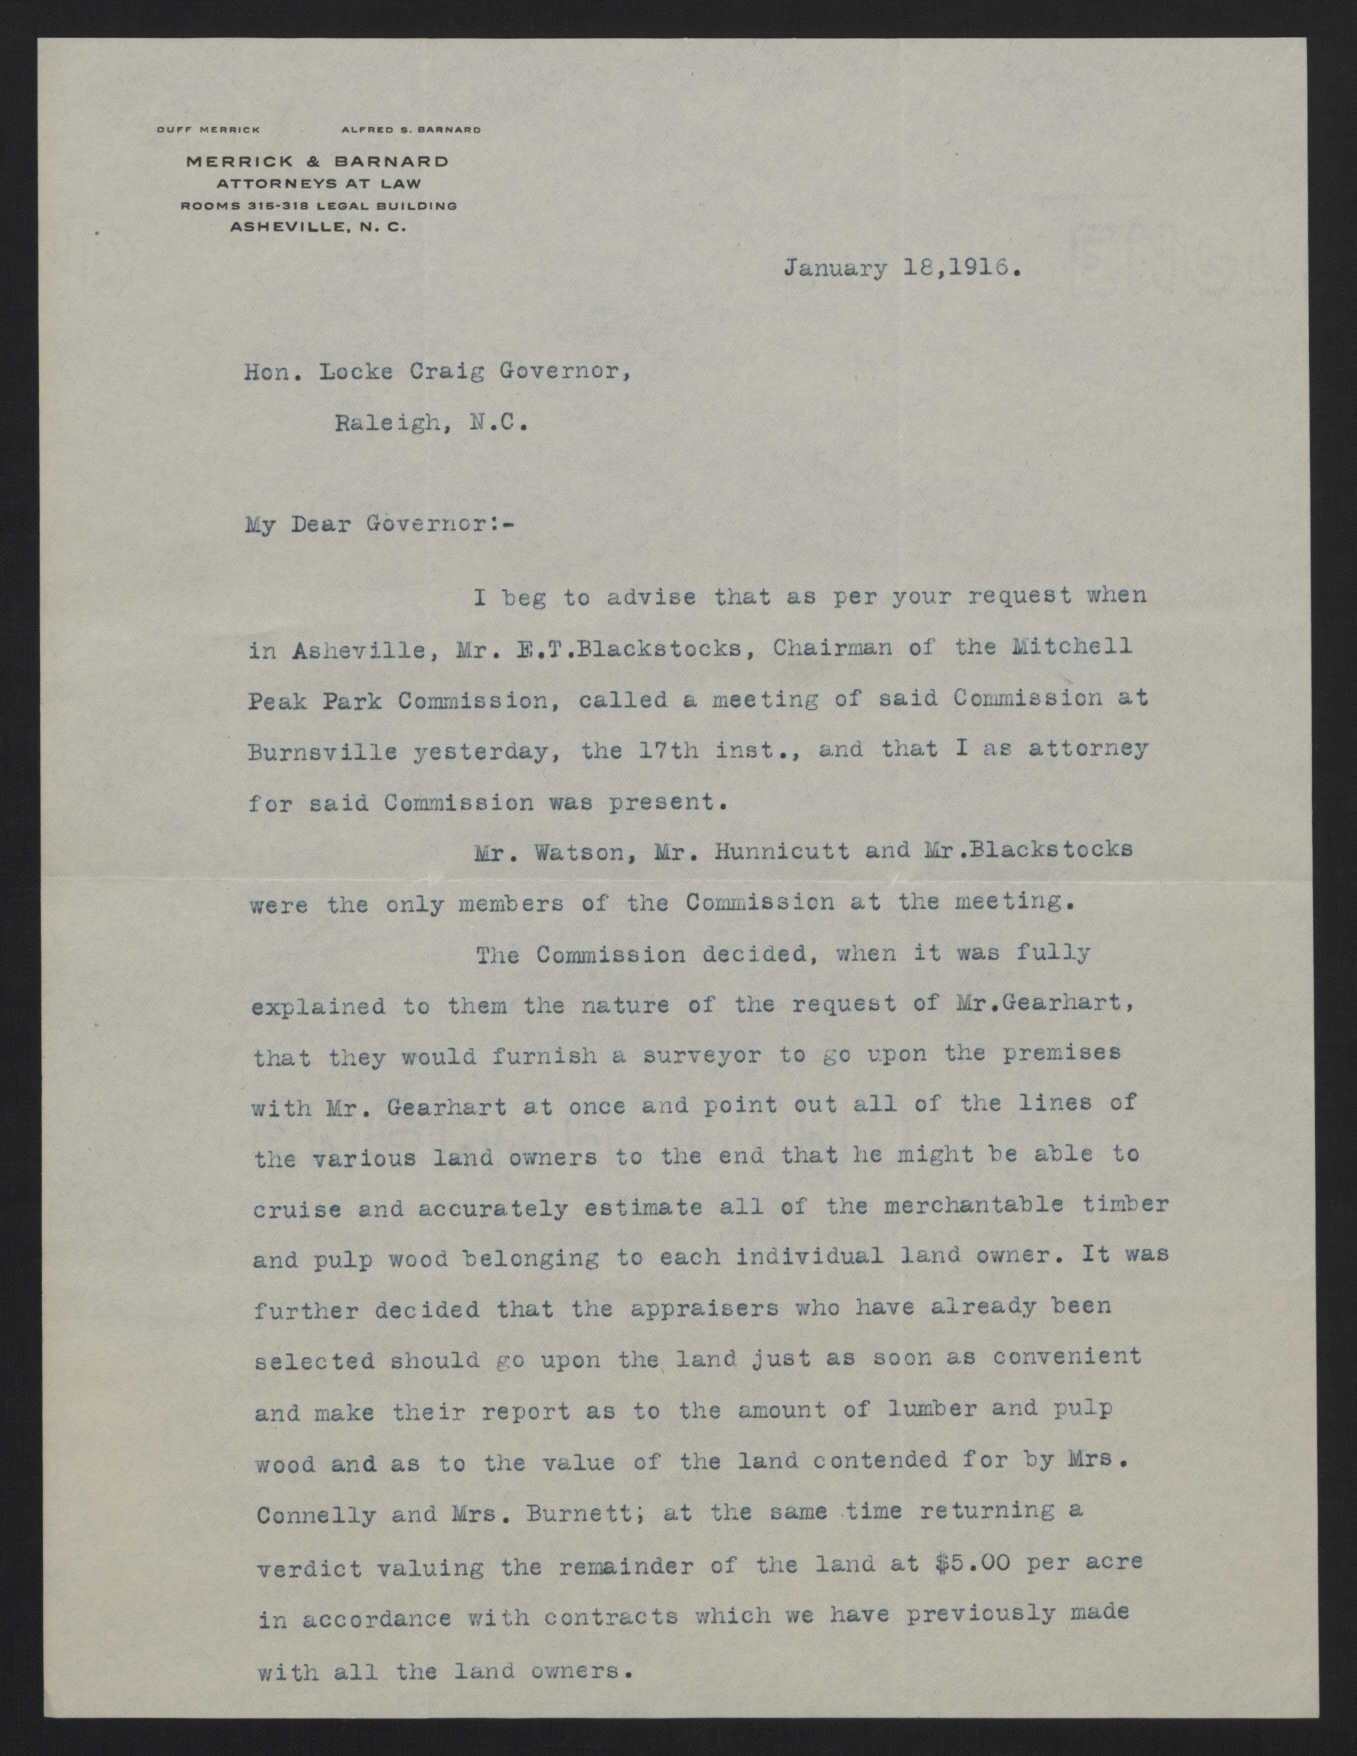 Letter from Johnston to Craig, January 18, 1916, page 1